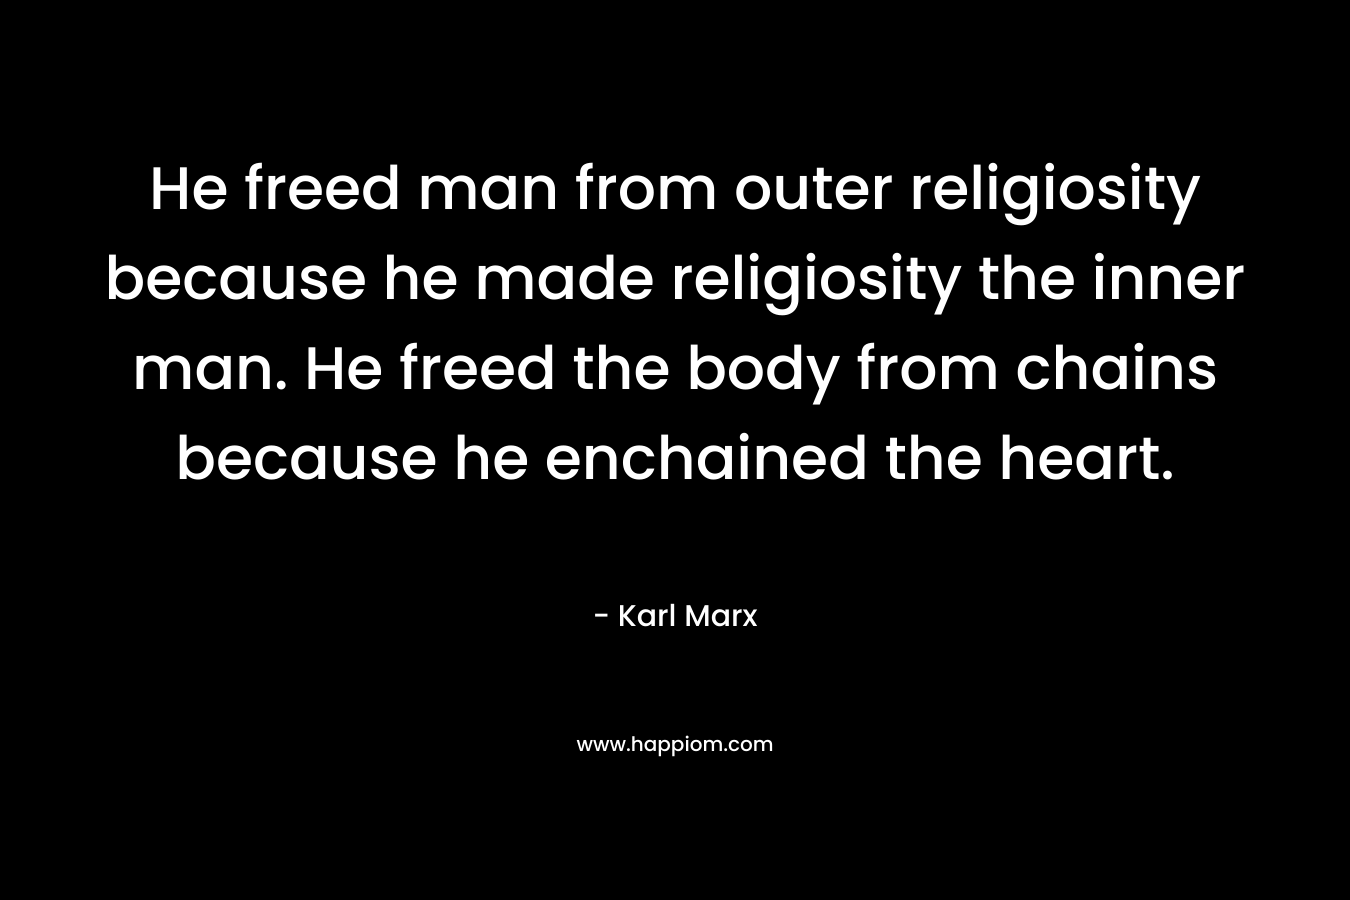 He freed man from outer religiosity because he made religiosity the inner man. He freed the body from chains because he enchained the heart. – Karl Marx